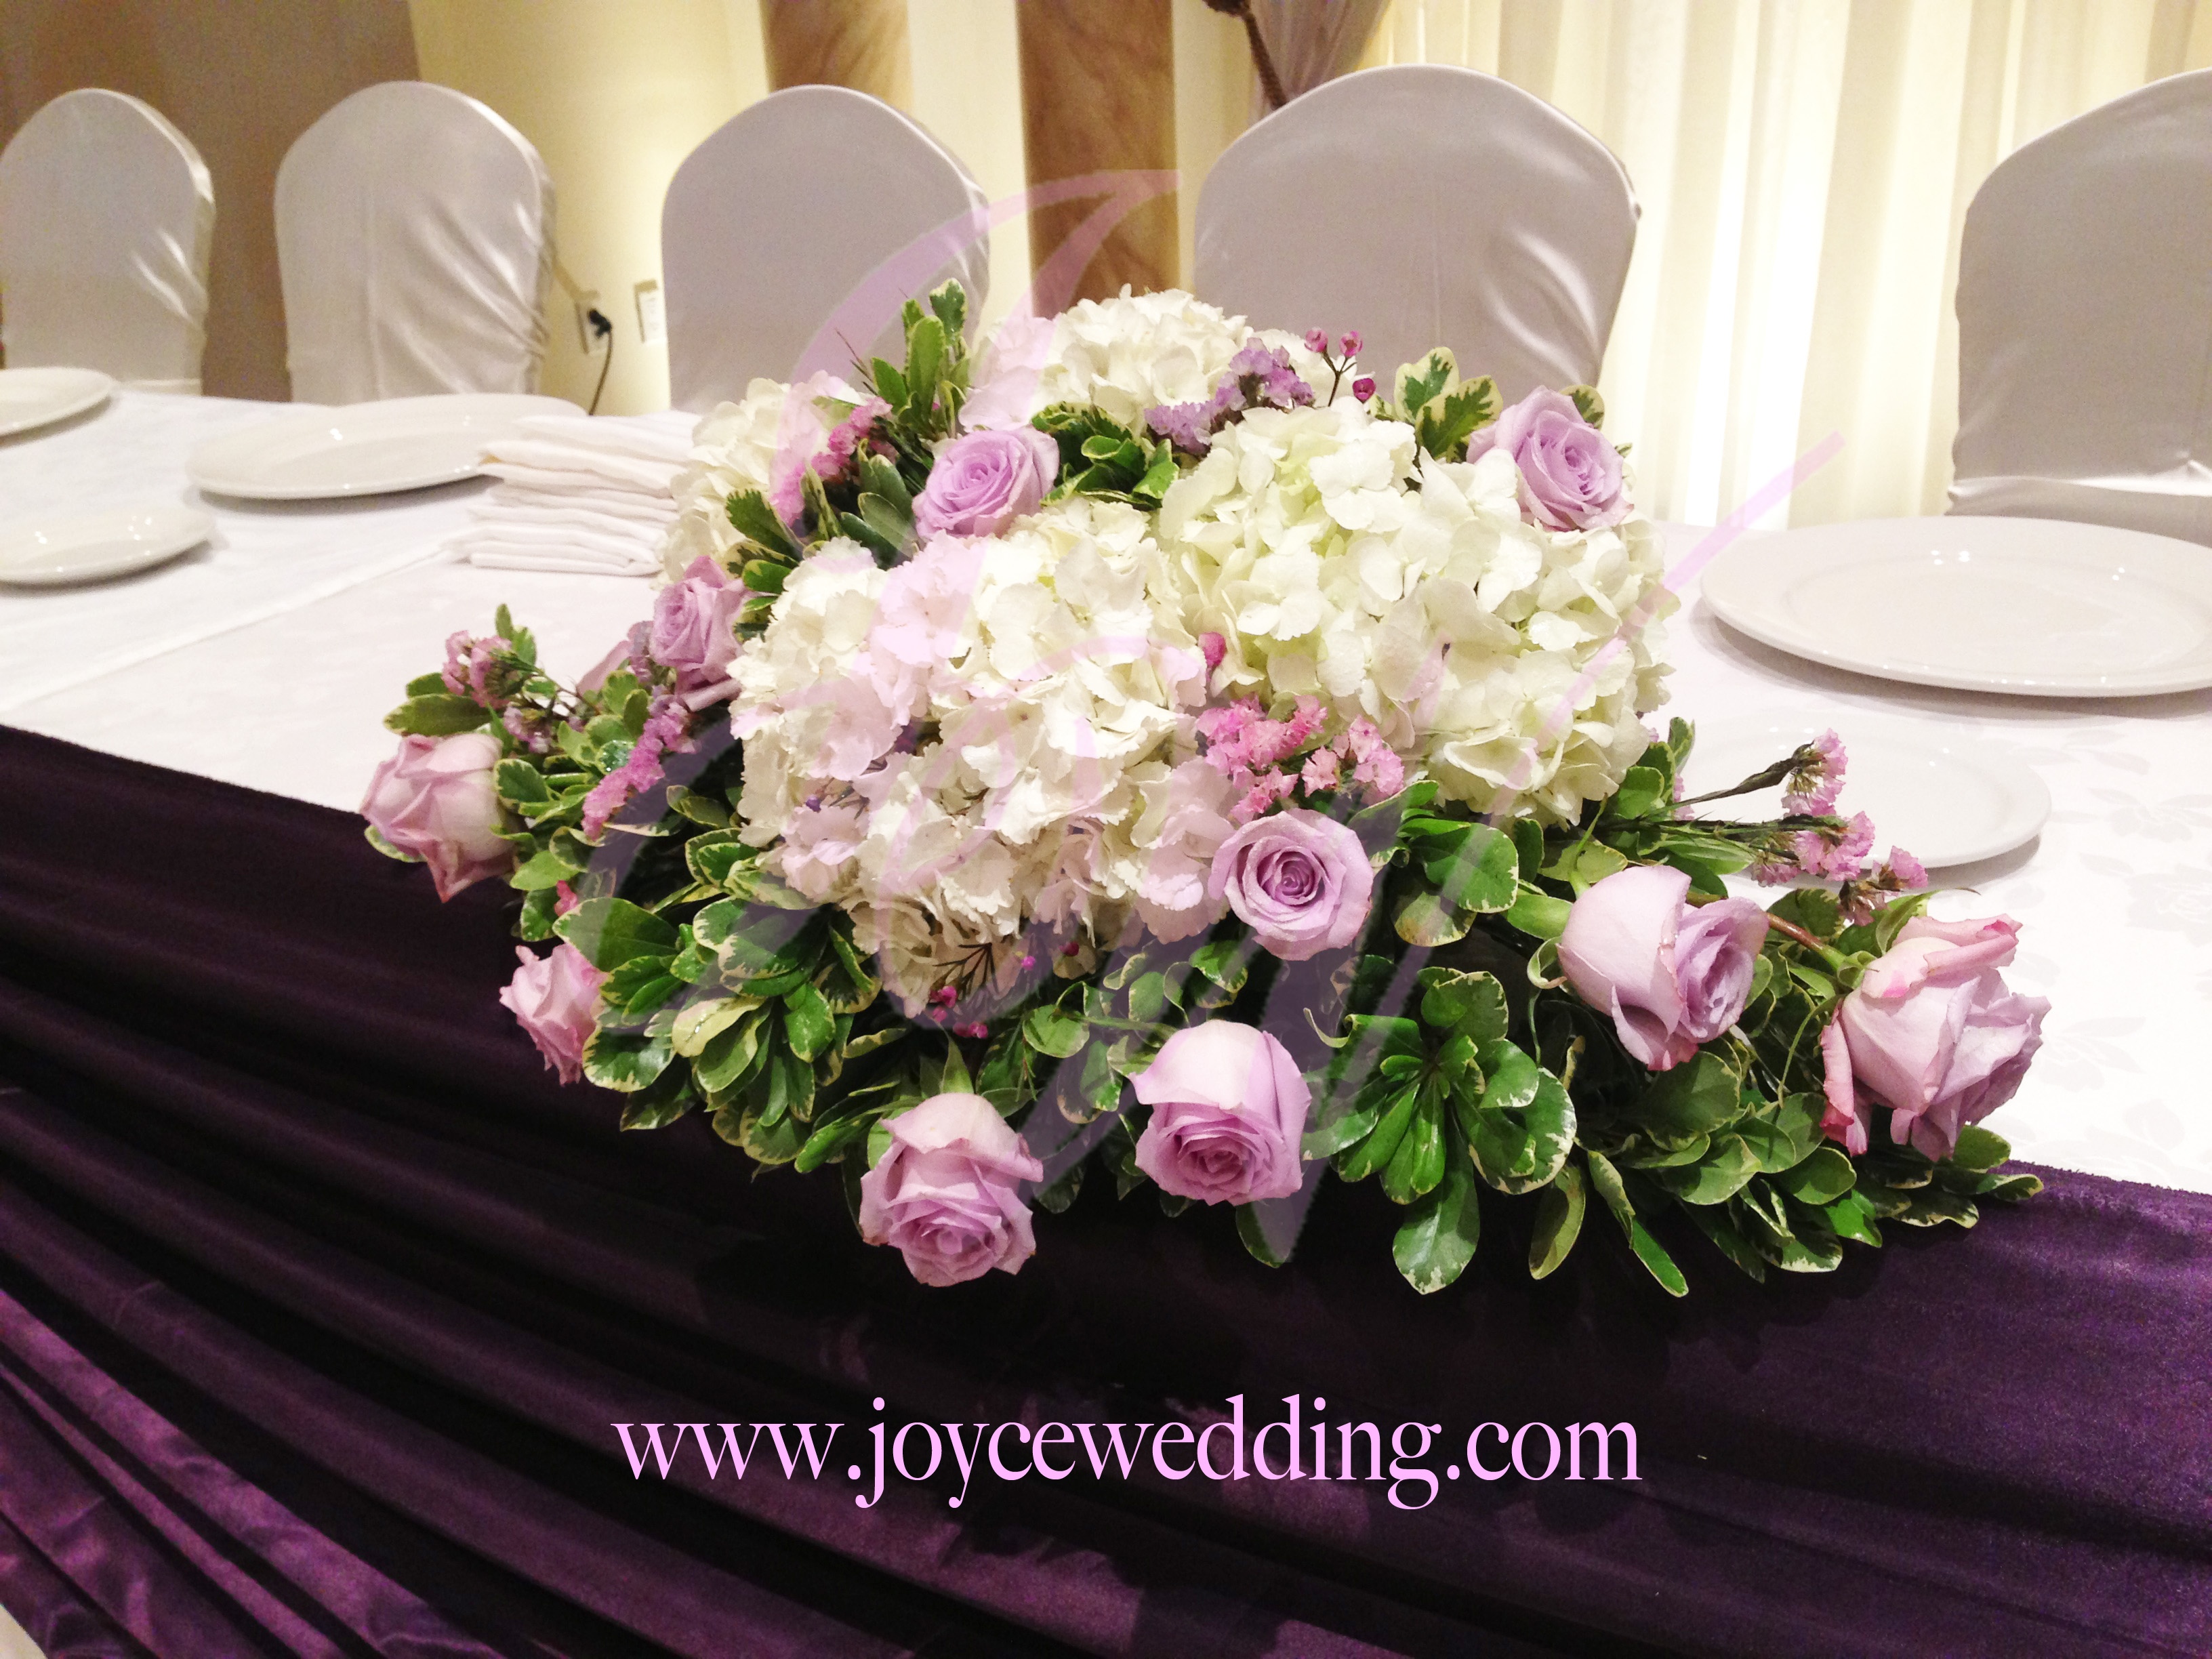 Flower Arrangements Using Hydrangeas and Roses Best Of Purple and ...